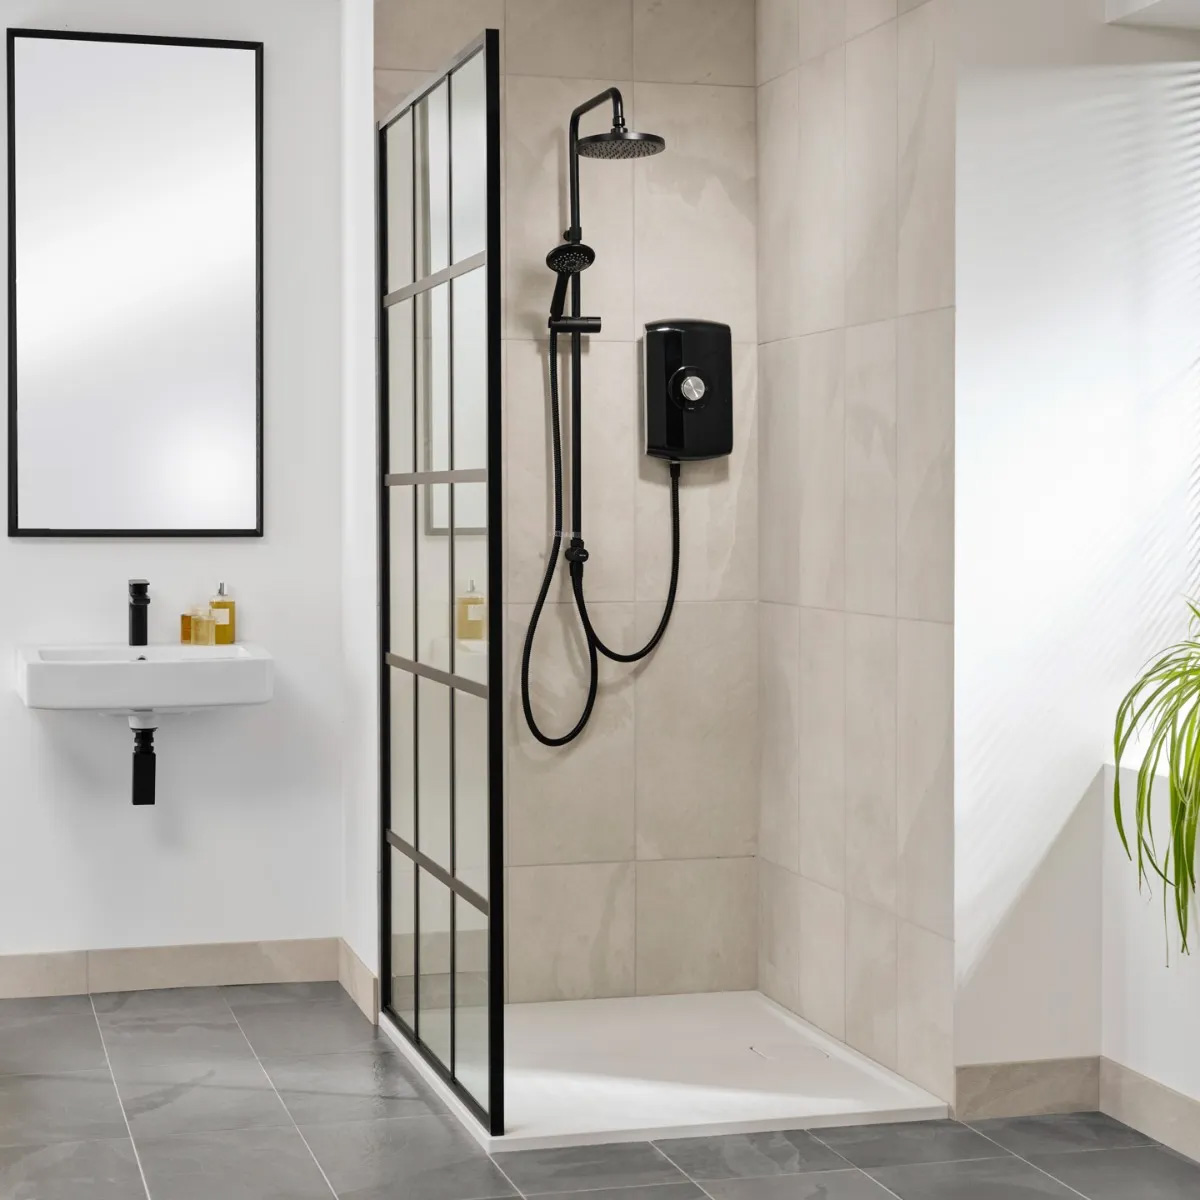 Triton Amore DuElec Electric Shower - Gloss Black (15971)